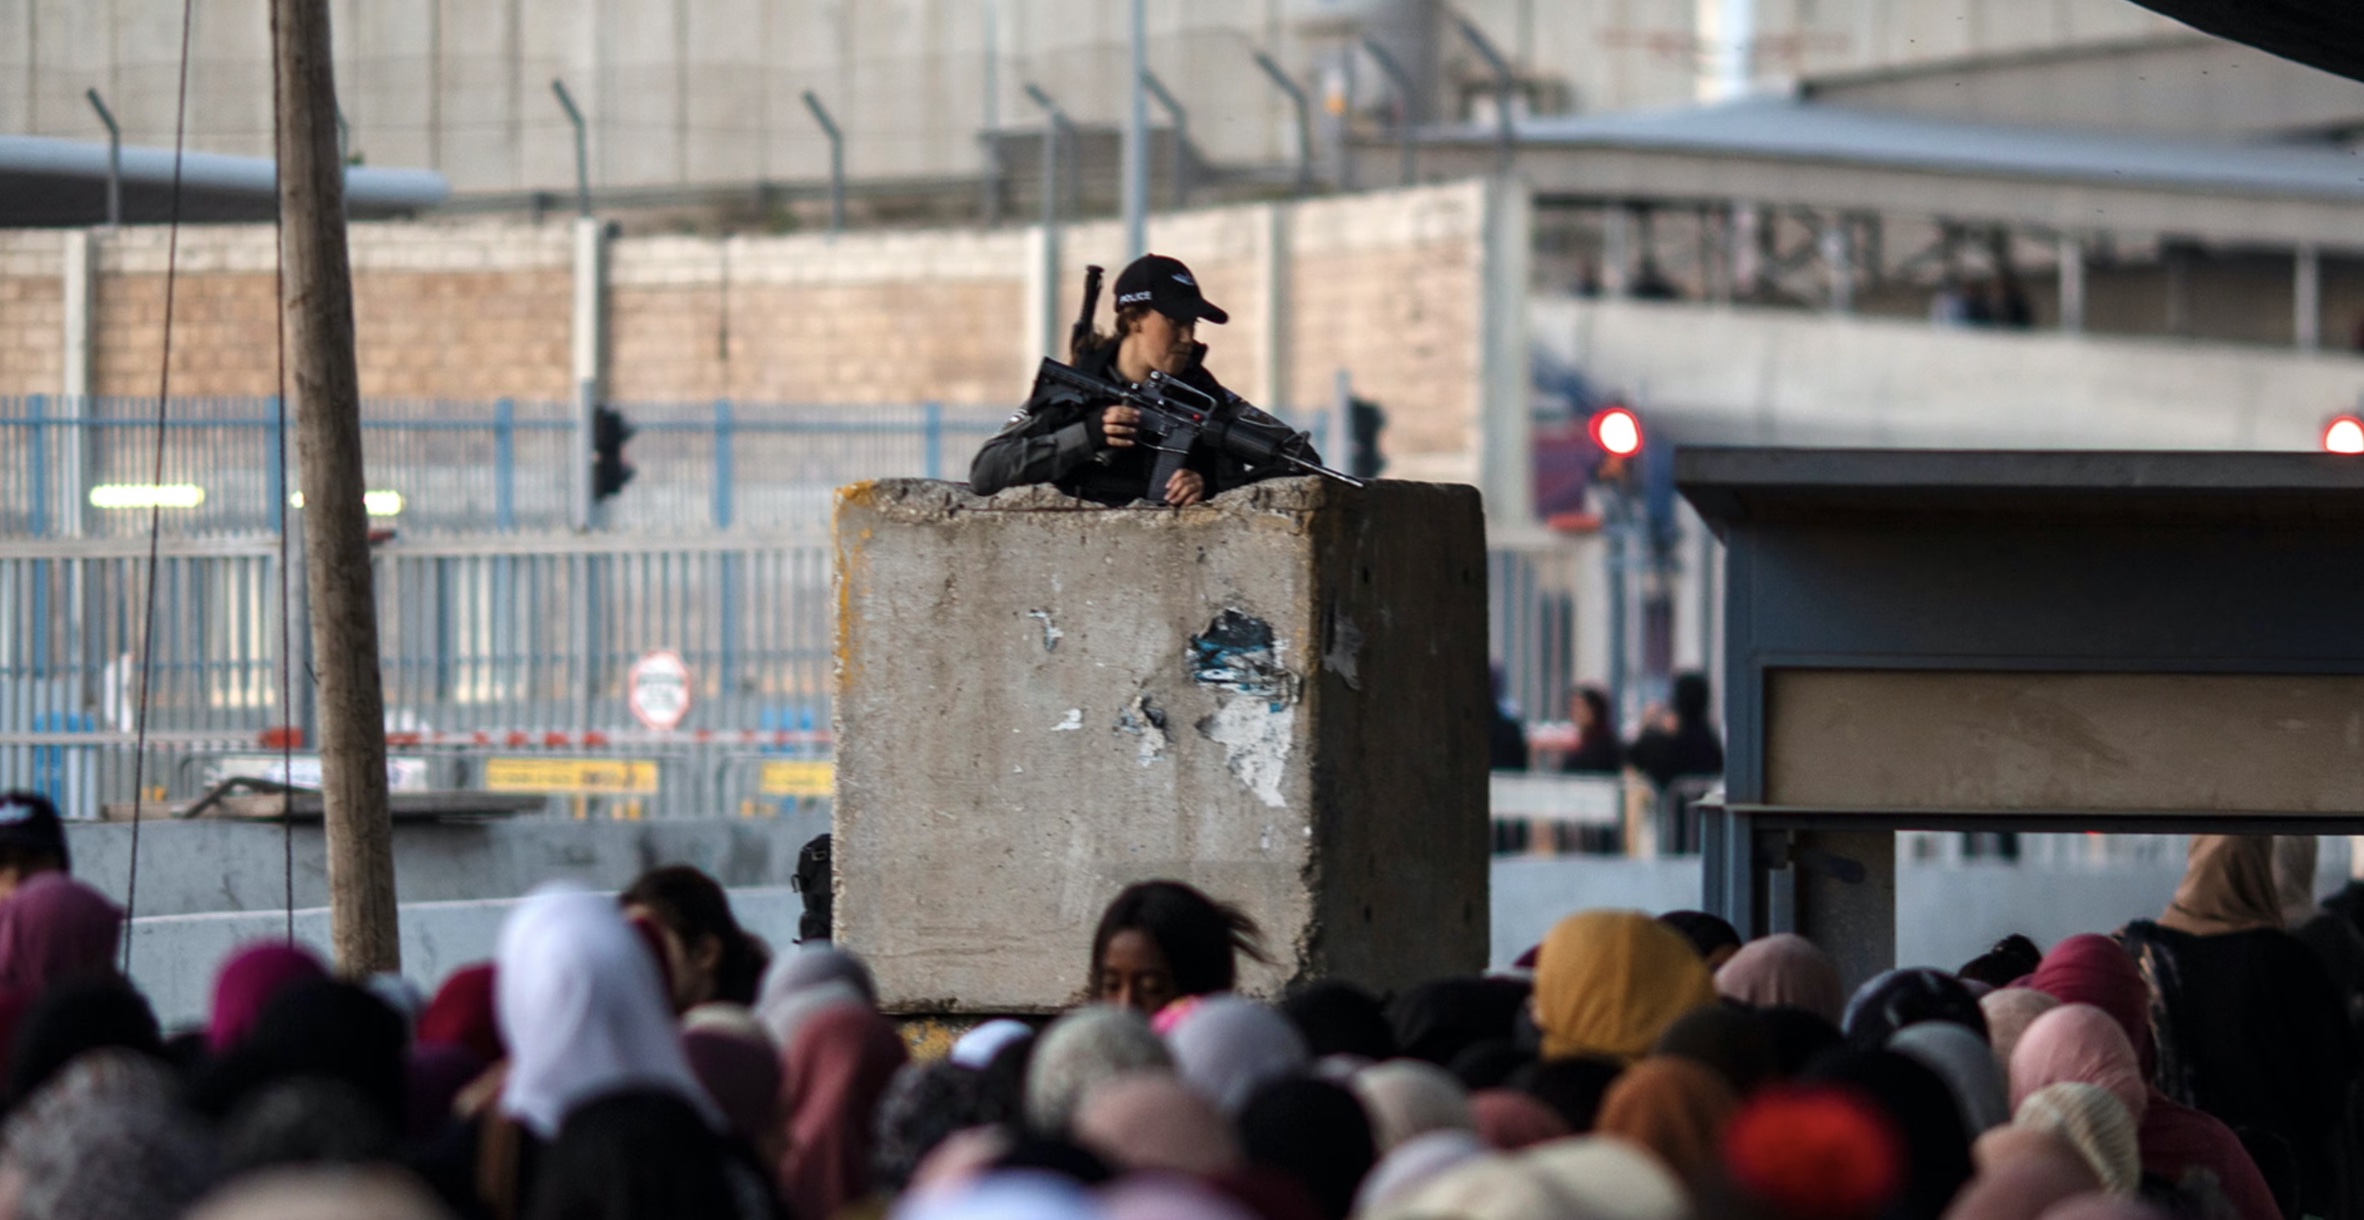 An Israeli border police stands guard as Palestinians make their way through Qalandia checkpoint